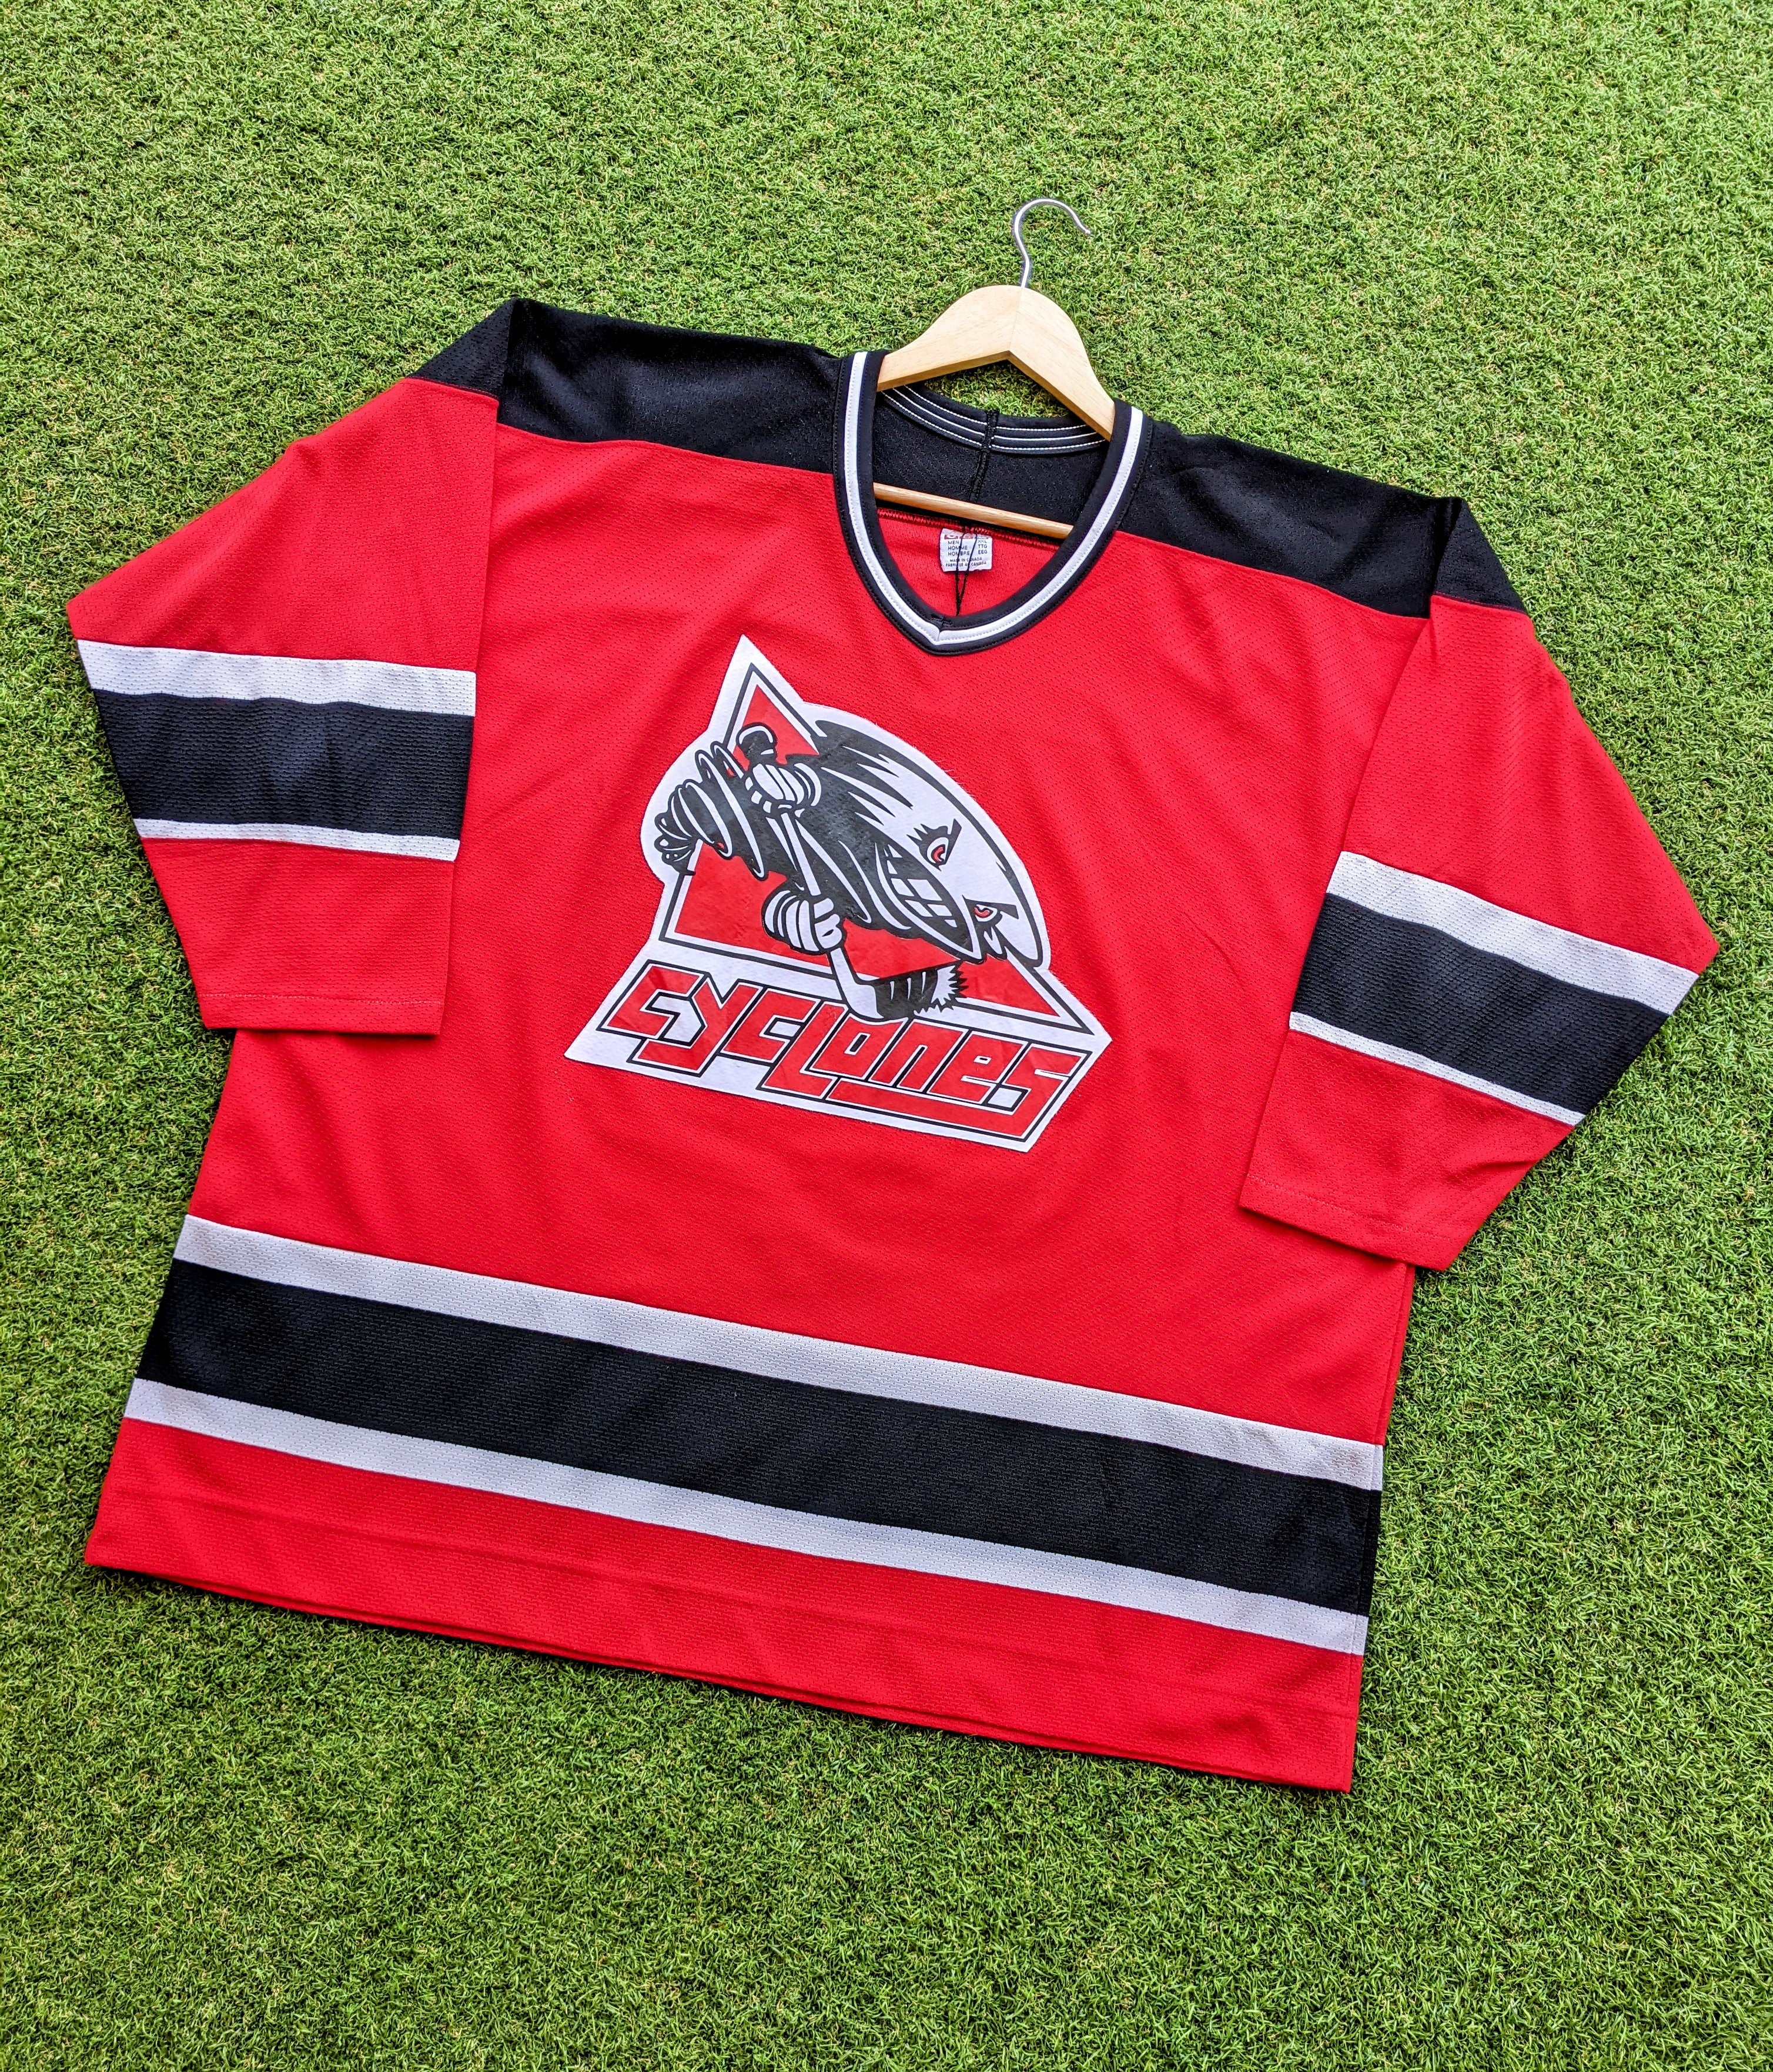 Cyclones 44 Red Jersey